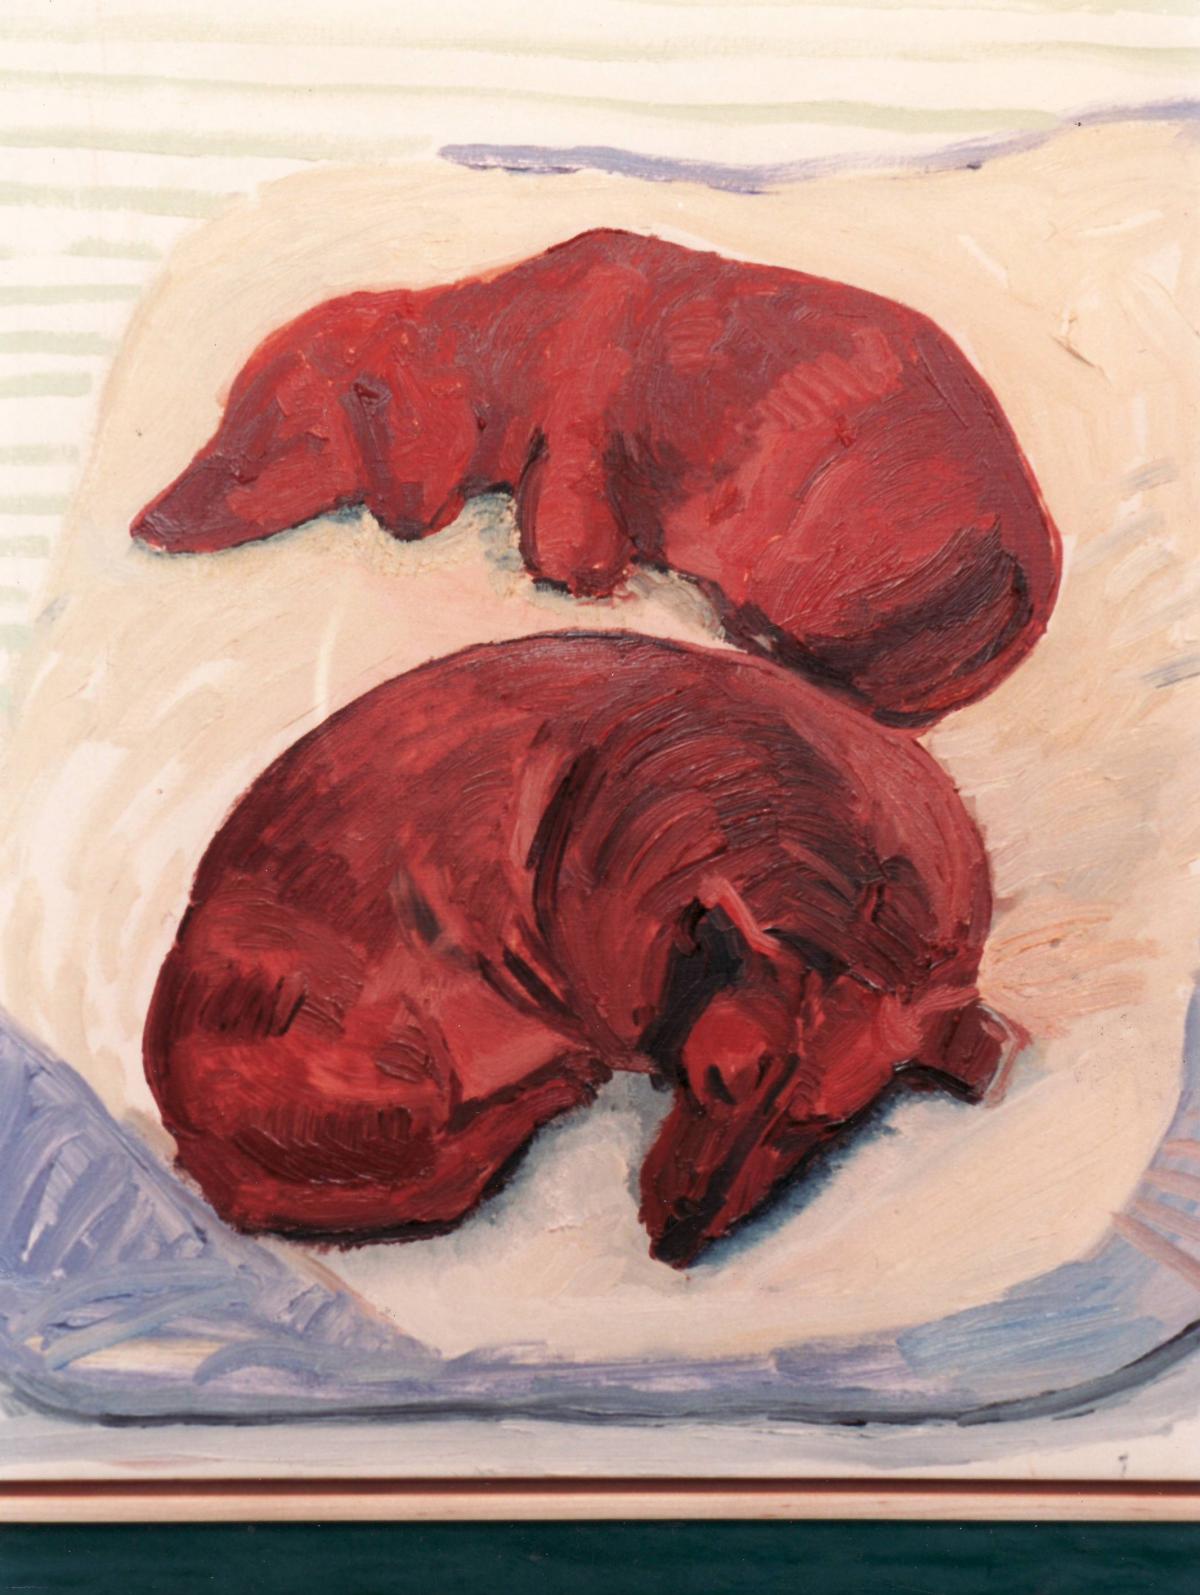 One of David Hockney's paintings of his beloved dachshunds